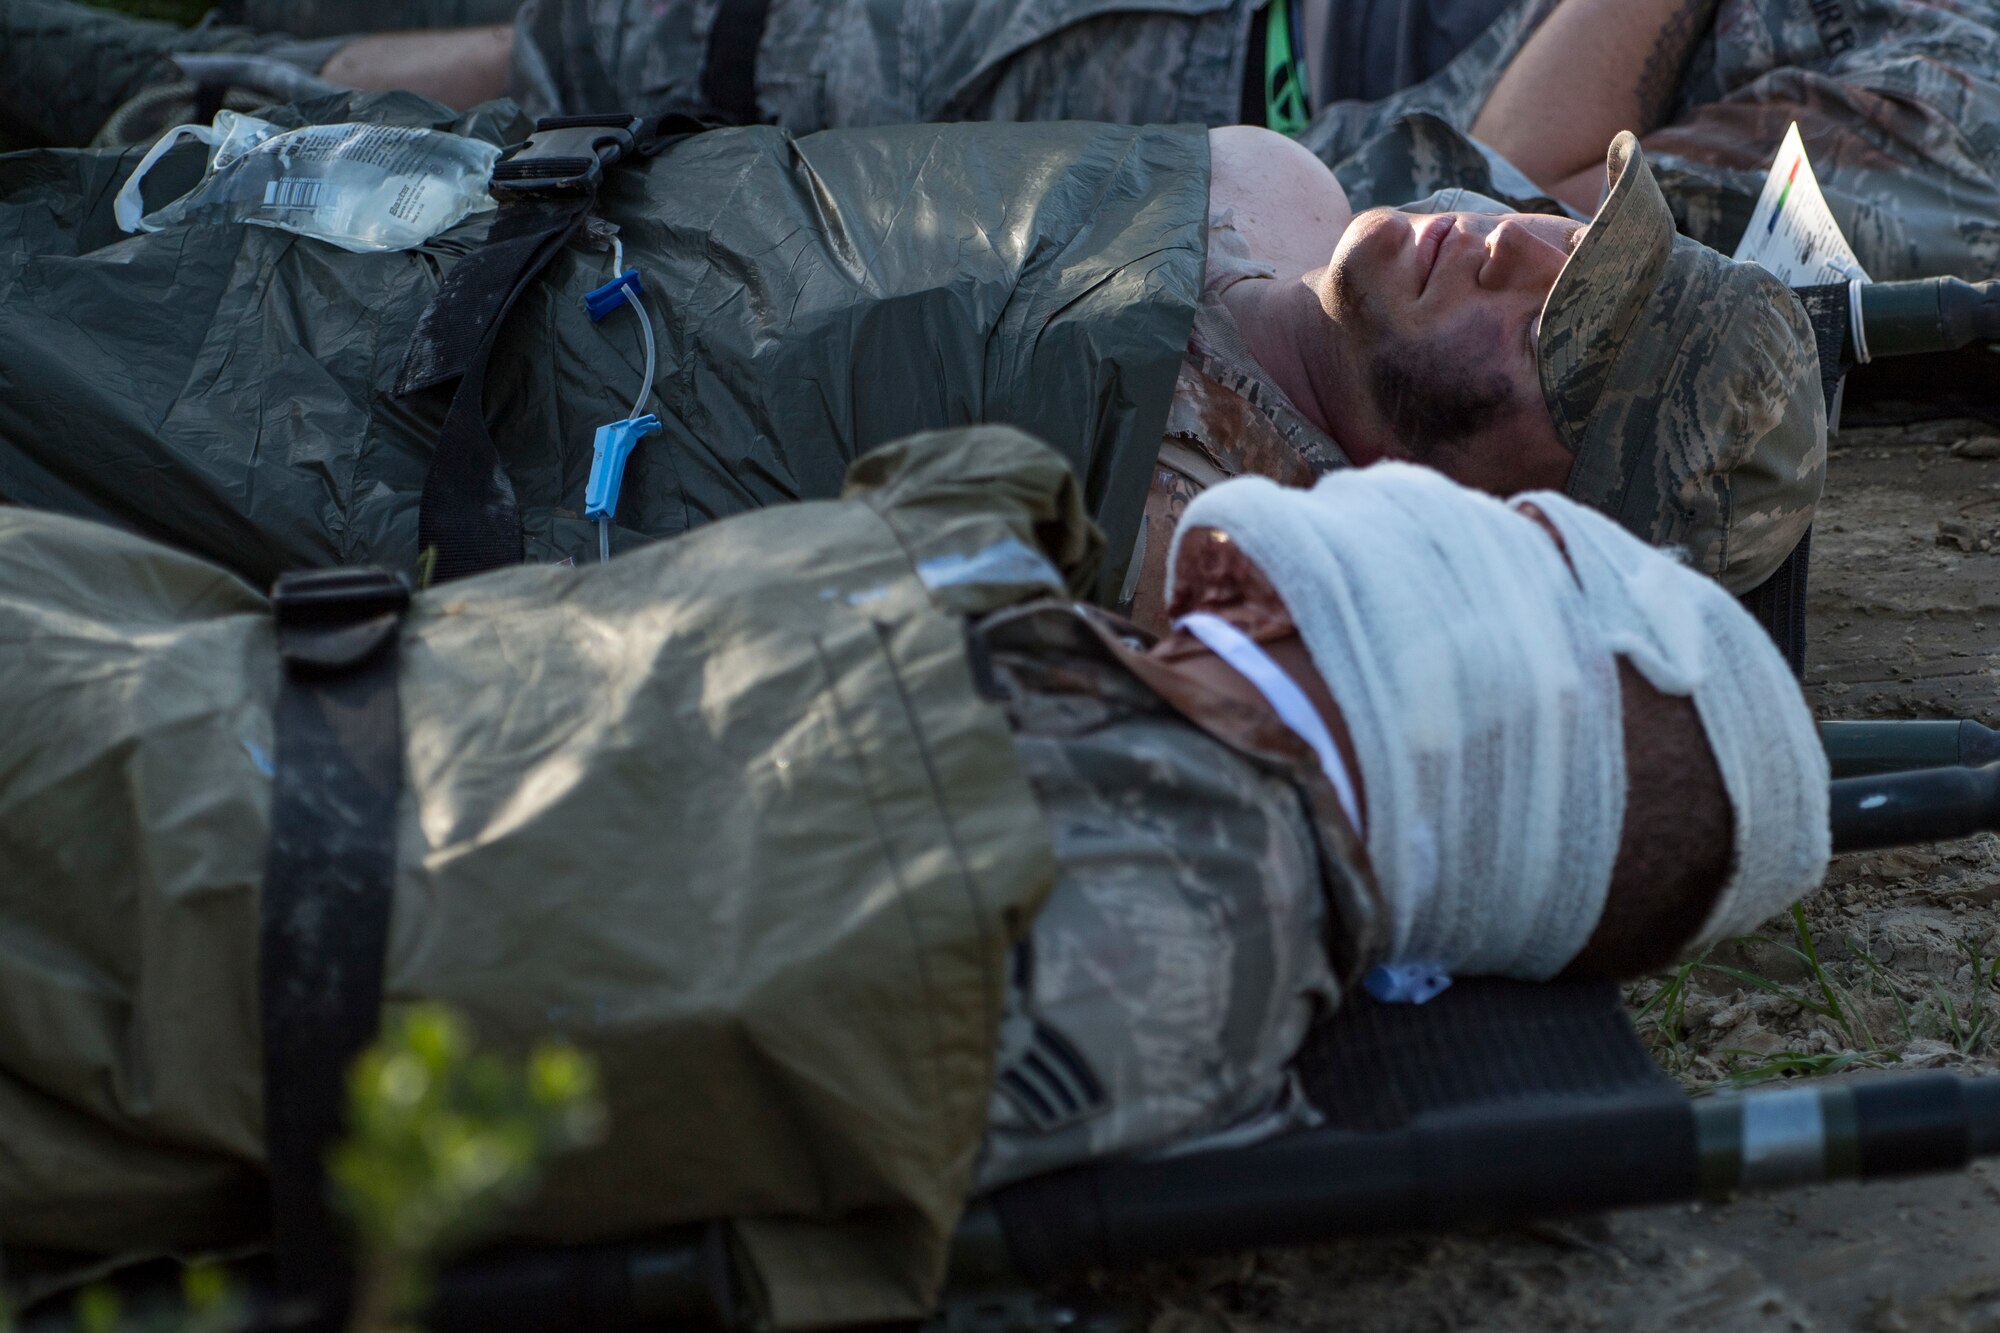 Simulated casualties rest on stretchers during Tiger Rescue IV, March 28, 2018, at Vandenberg Air Force Base, Calif. The four-day exercise challenged Airmen from multiple rescue squadrons to bring the capabilities of the personnel recovery triad together to successfully complete rescue missions and maintain proficiency. The three branches of the personnel recovery triad are the HC-130J Combat King II, HH-60G Pave Hawk and the guardian angel weapons system or pararescuemen. (U.S. Air Force photo by Senior Airman Janiqua P. Robinson)